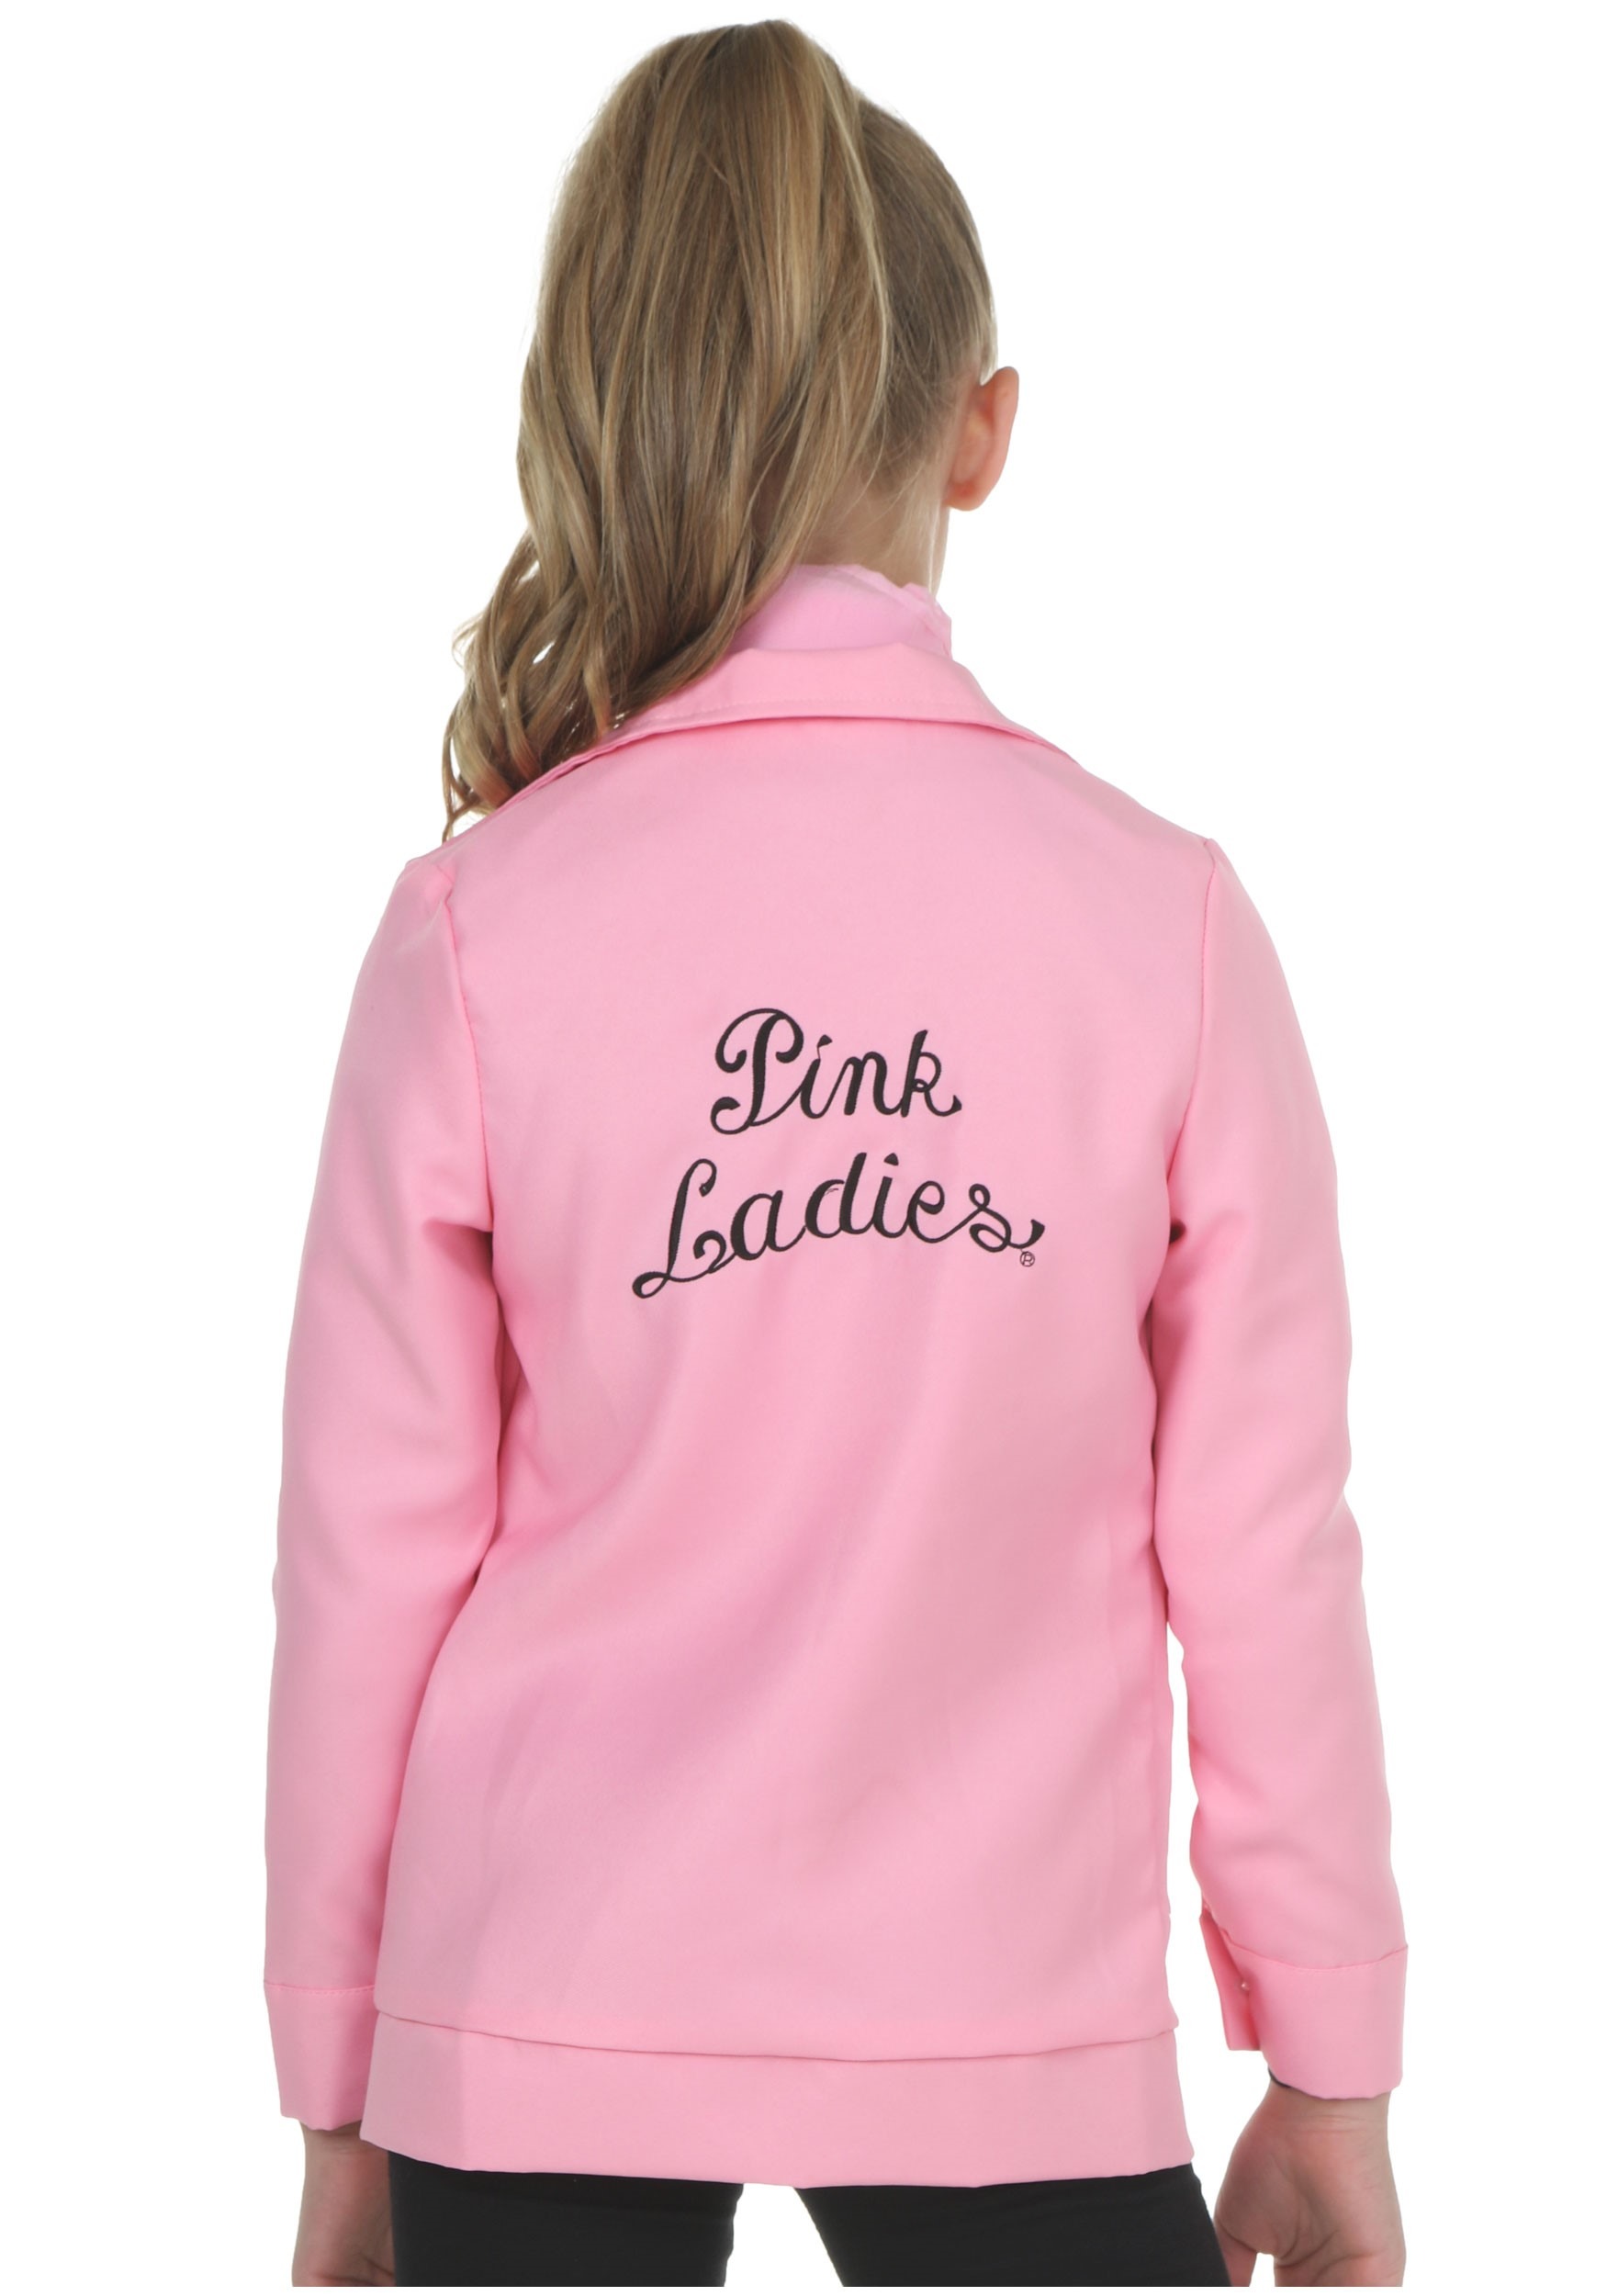 Chaqueta pink lady inf